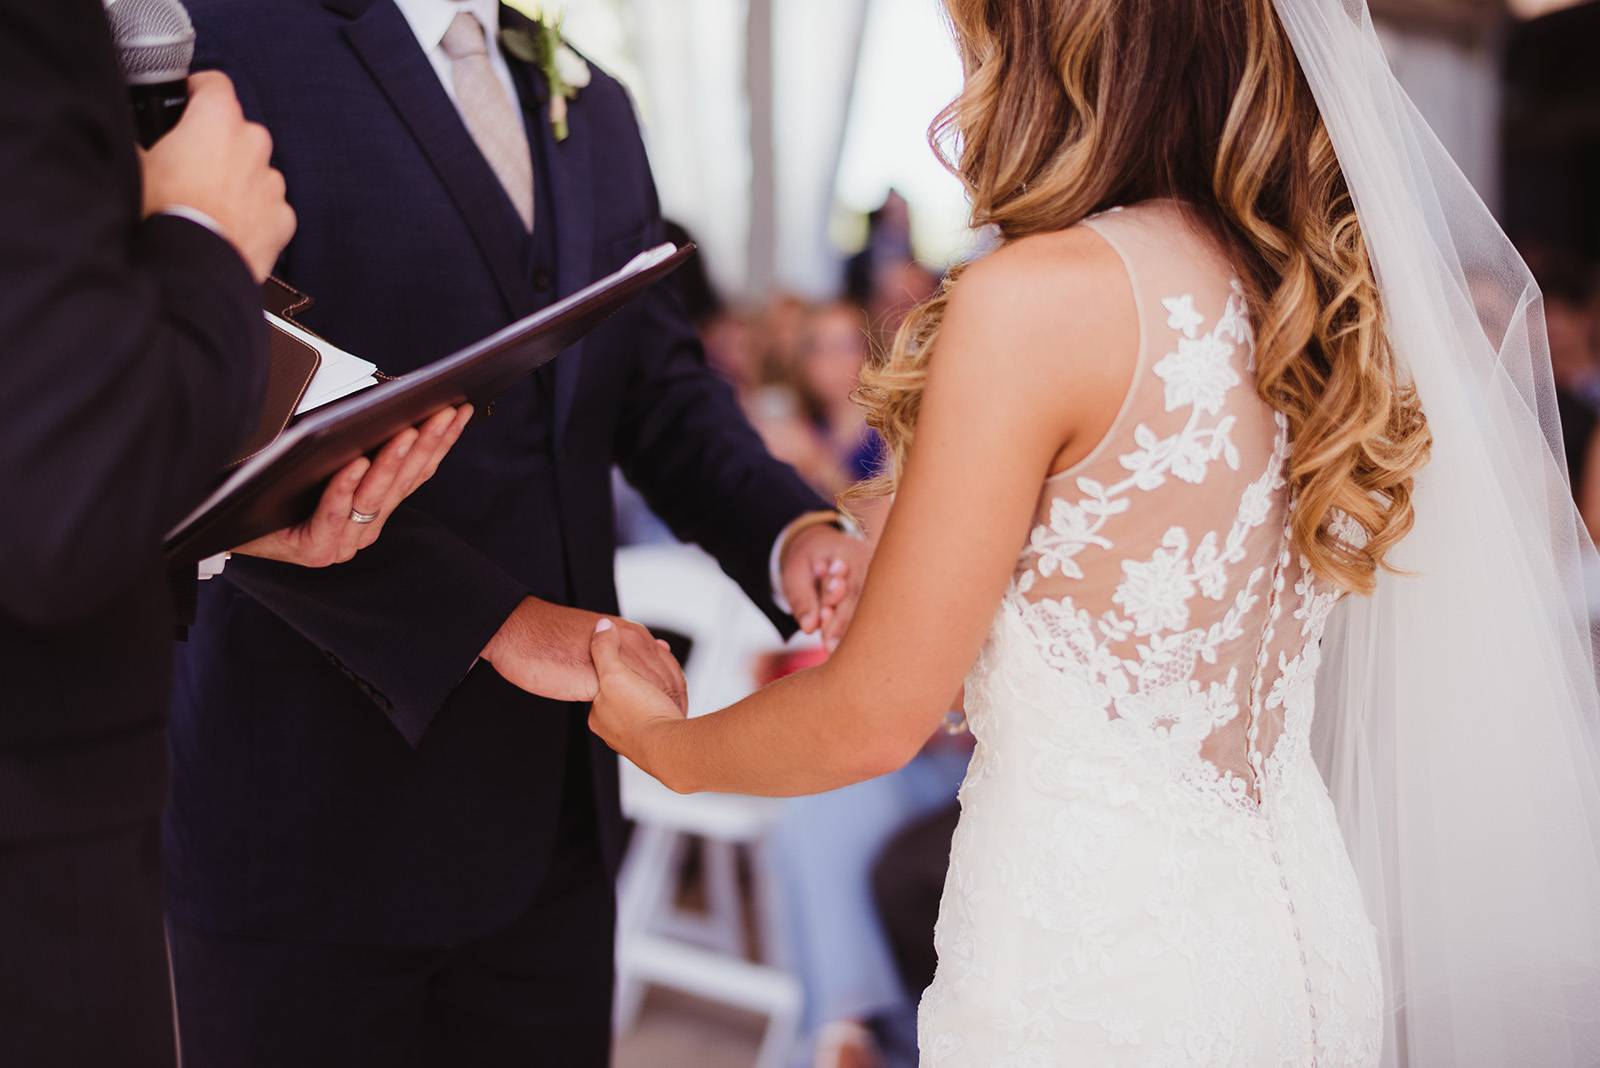 wedding officiants marriage license tips